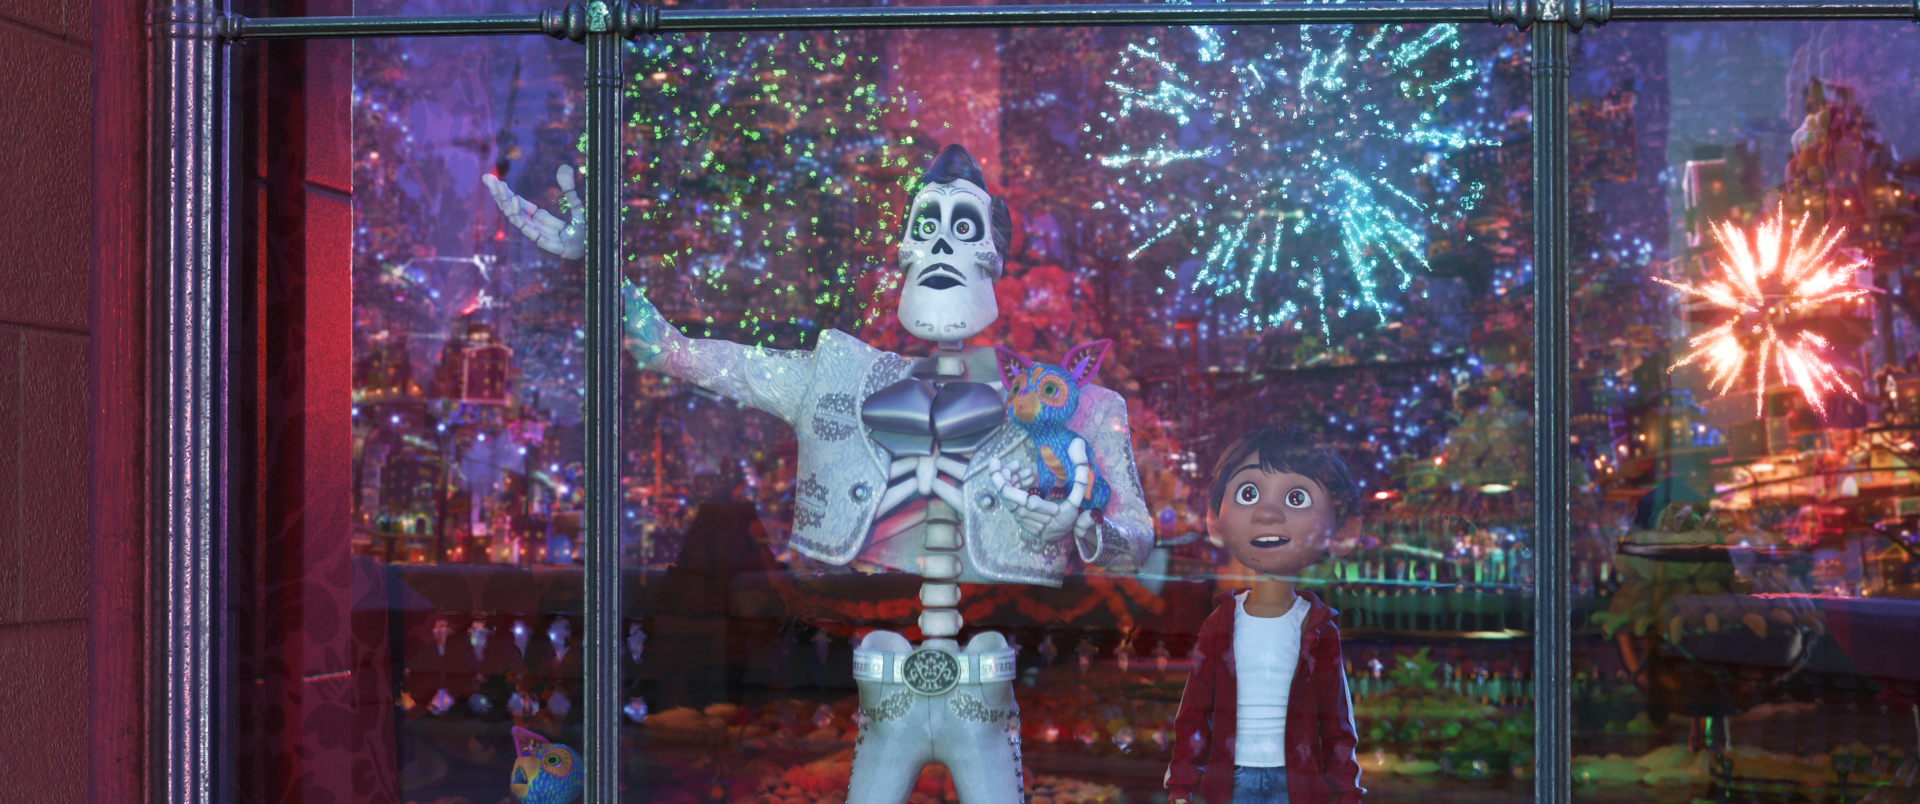 Disney-Pixar’s Coco Is Full of Heart But is it Worth Seeing? –  A Spoiler Free Review